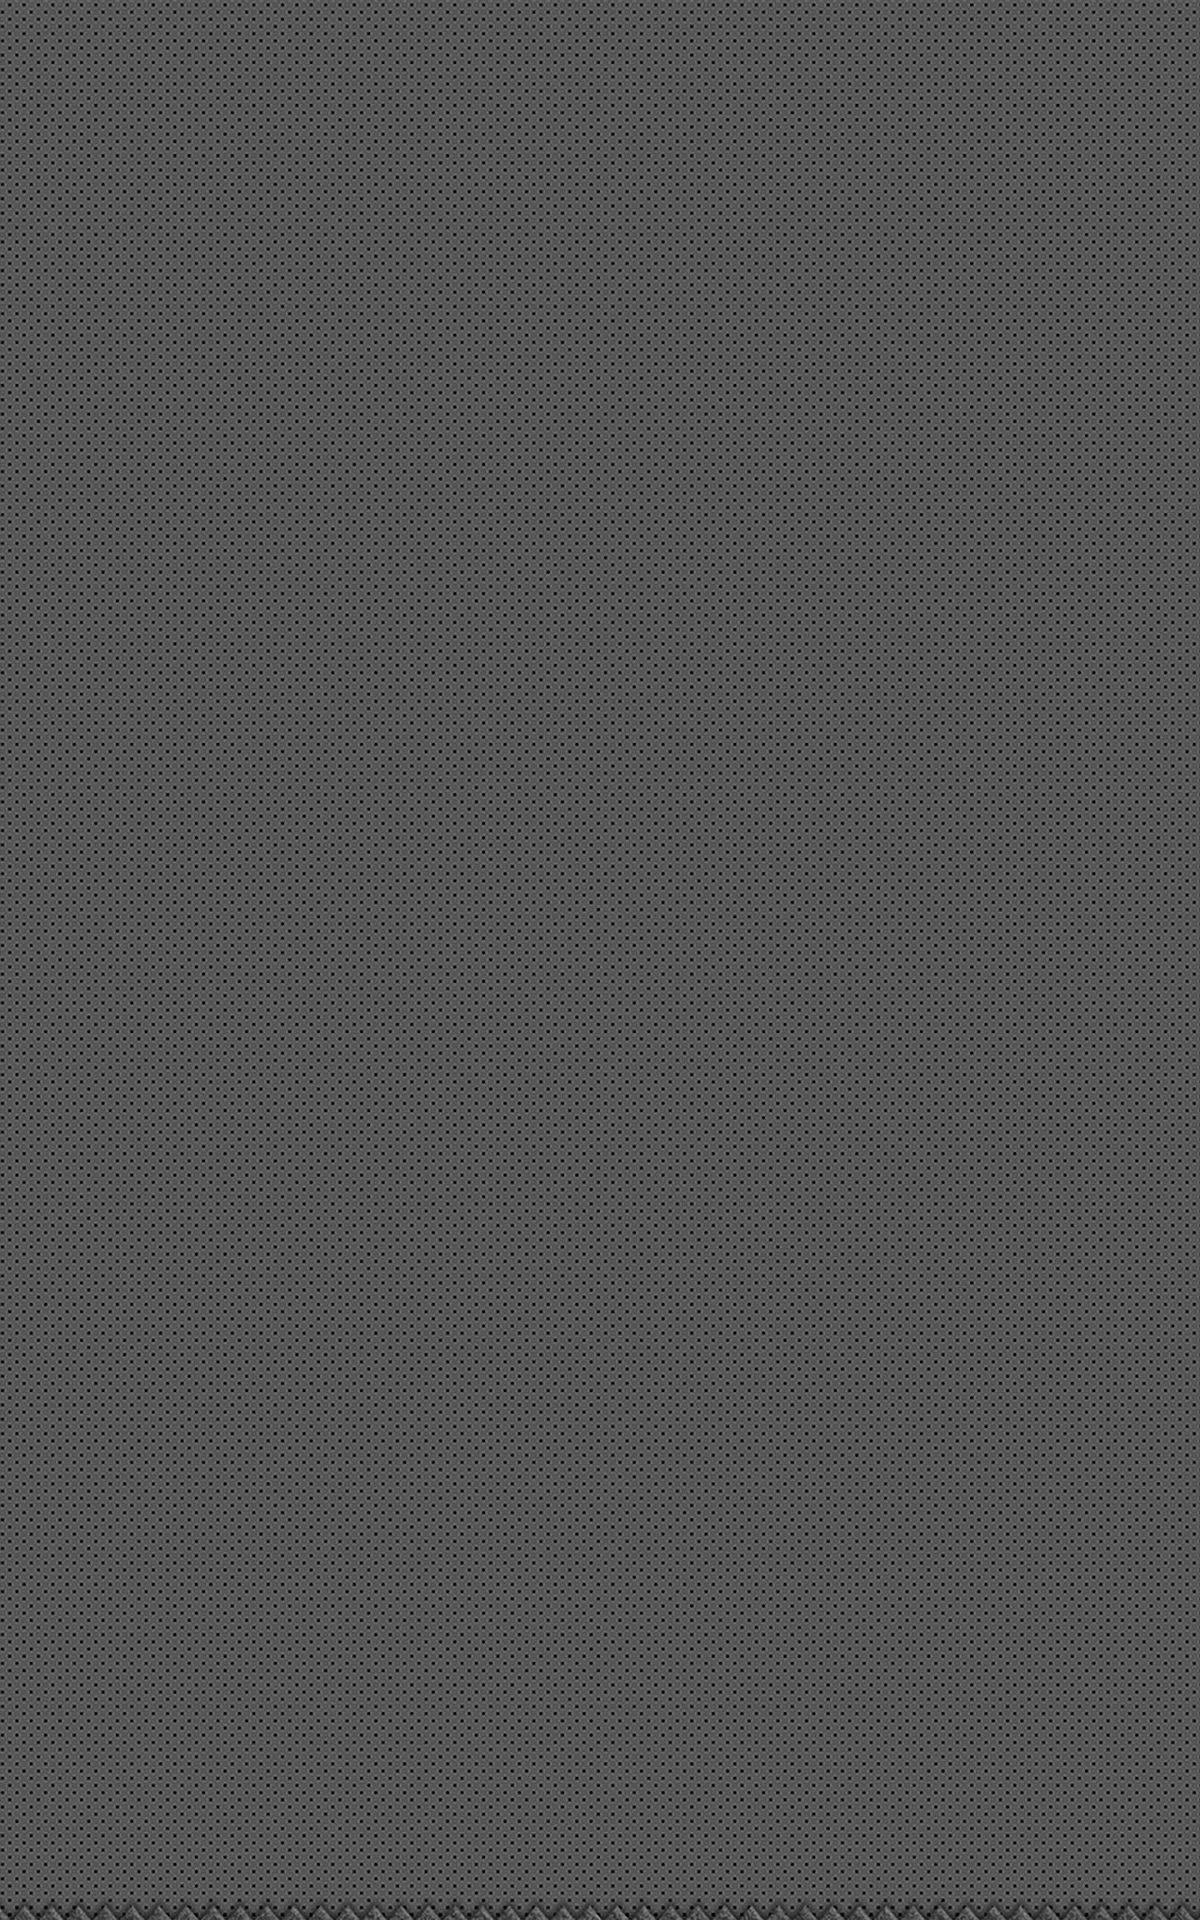 Medium Gray Background With Subtle Texture Wallpaper